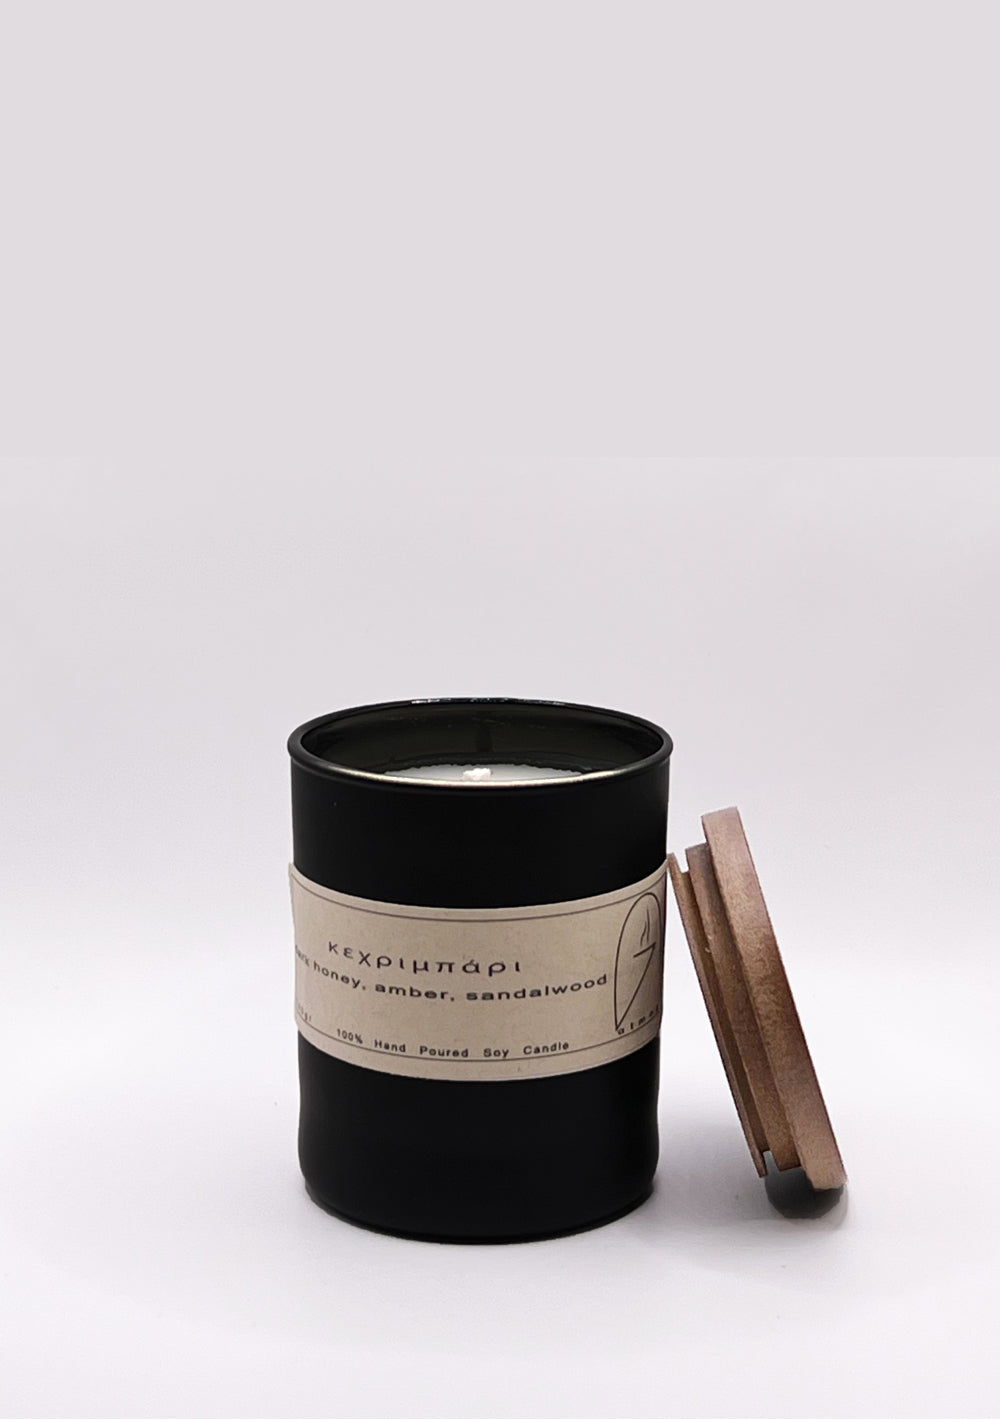 Scented Candle κεχριμπάρι - amber, Sustainable black glass, recycling label, wooden lid. 